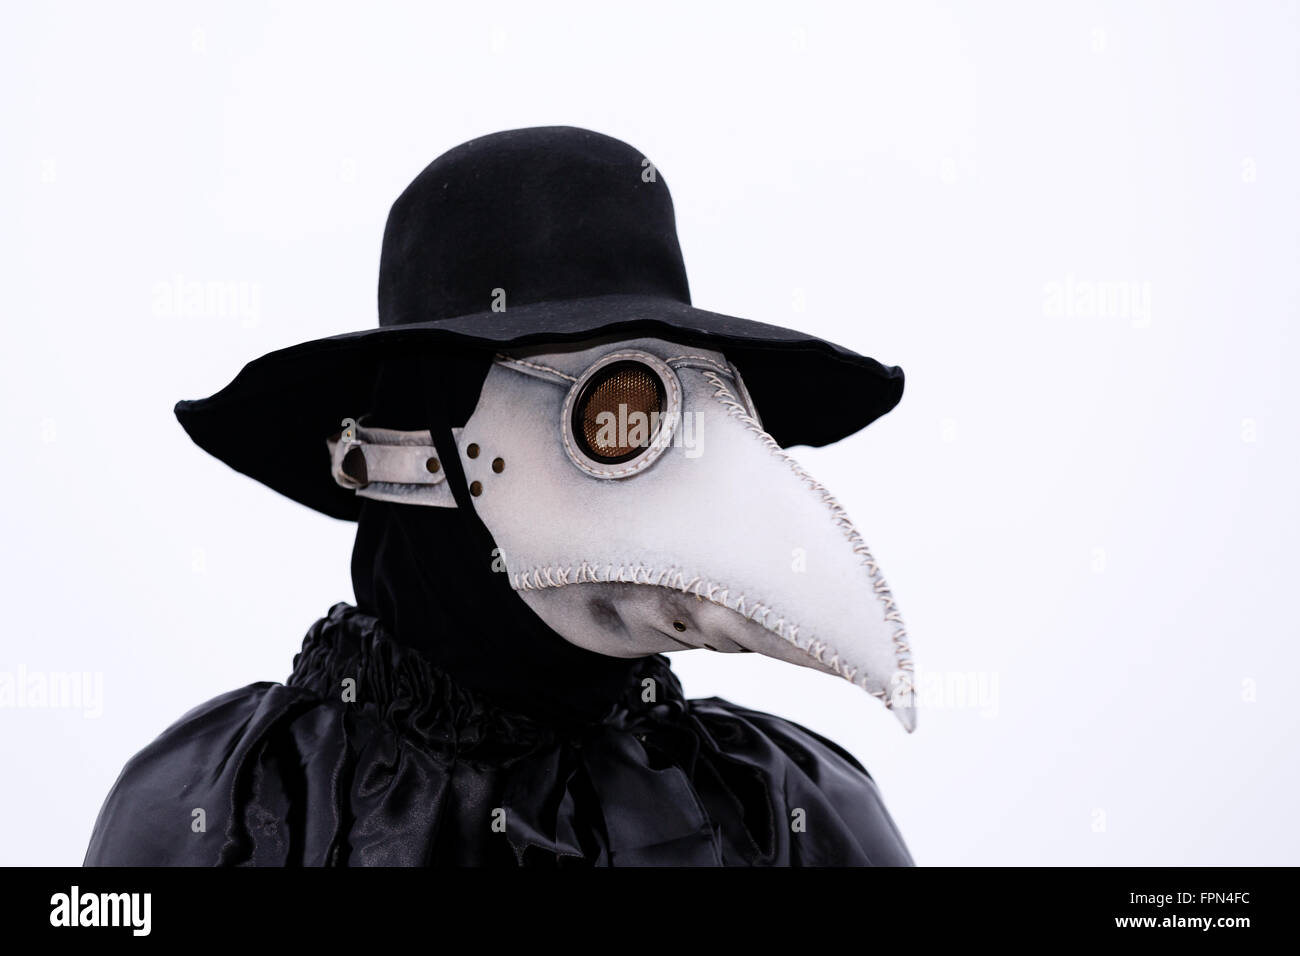 A man dressed in a medieval plague doctor costume, Venice, Italy Stock Photo